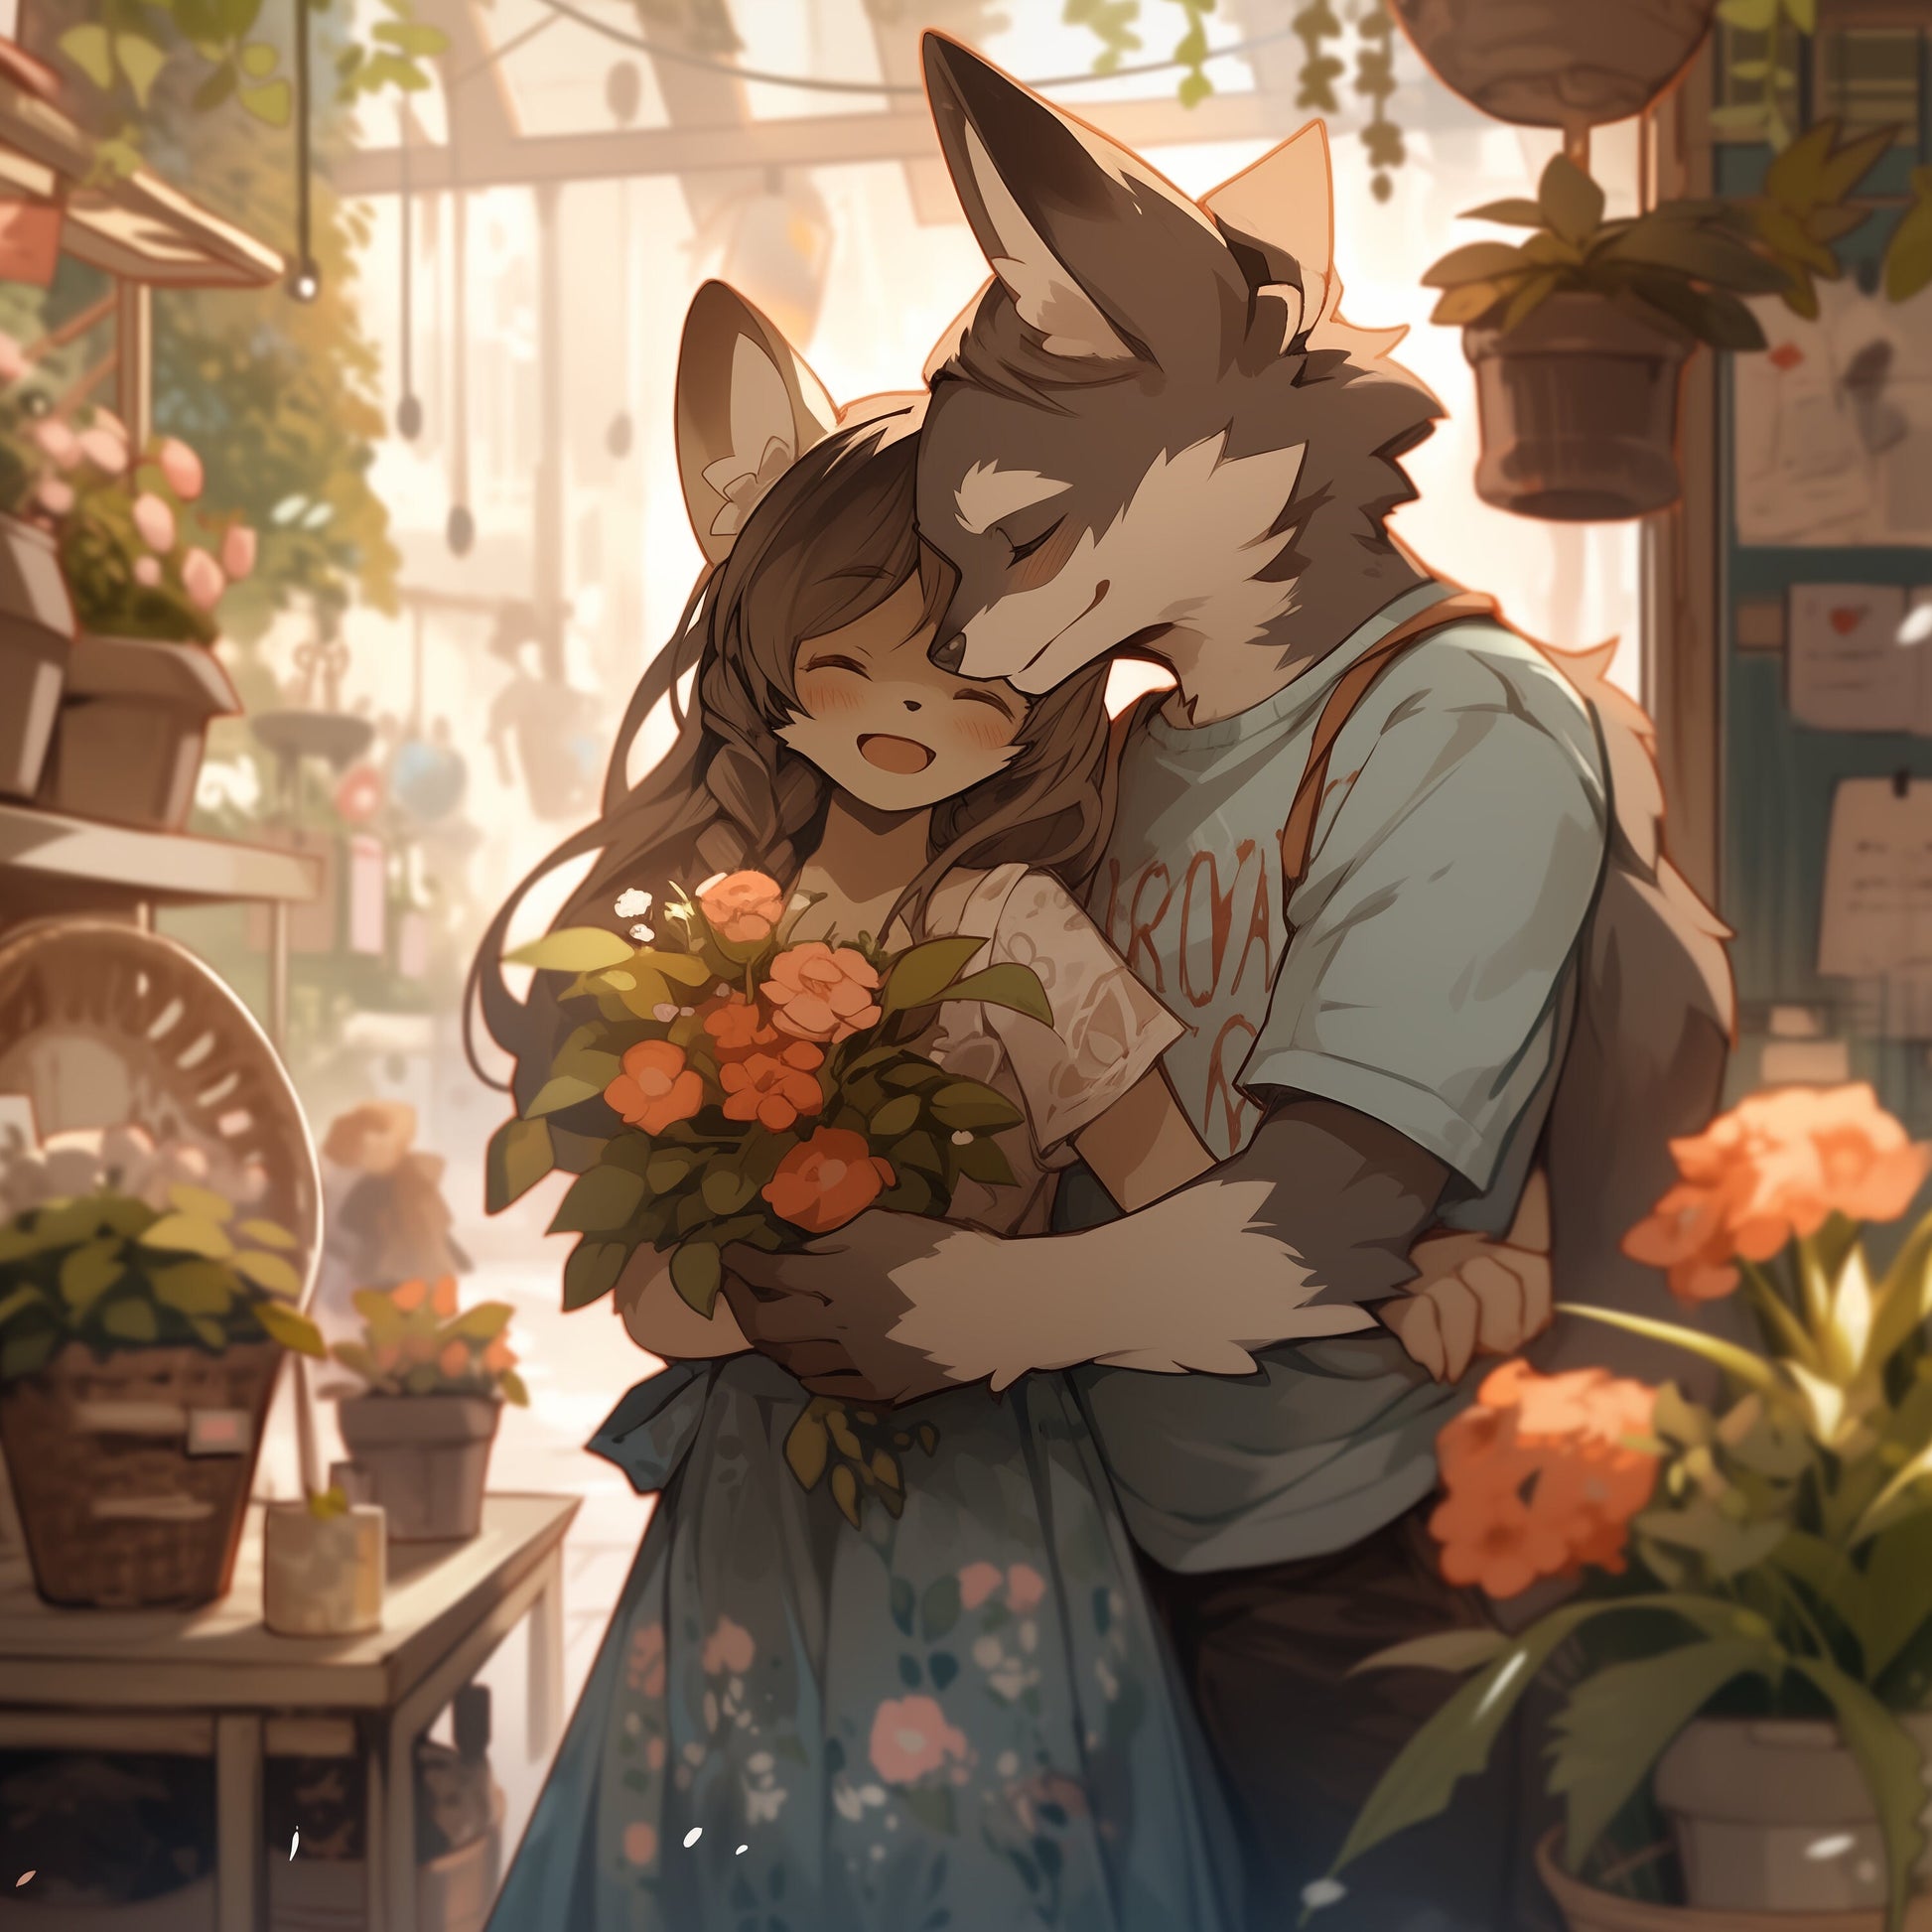 Furry Couple Commission | Digital Painting | Masterpiece Couple Fursona Commission | Fursona Gift for Furry Lovers Fluffy Couple Commission My Store